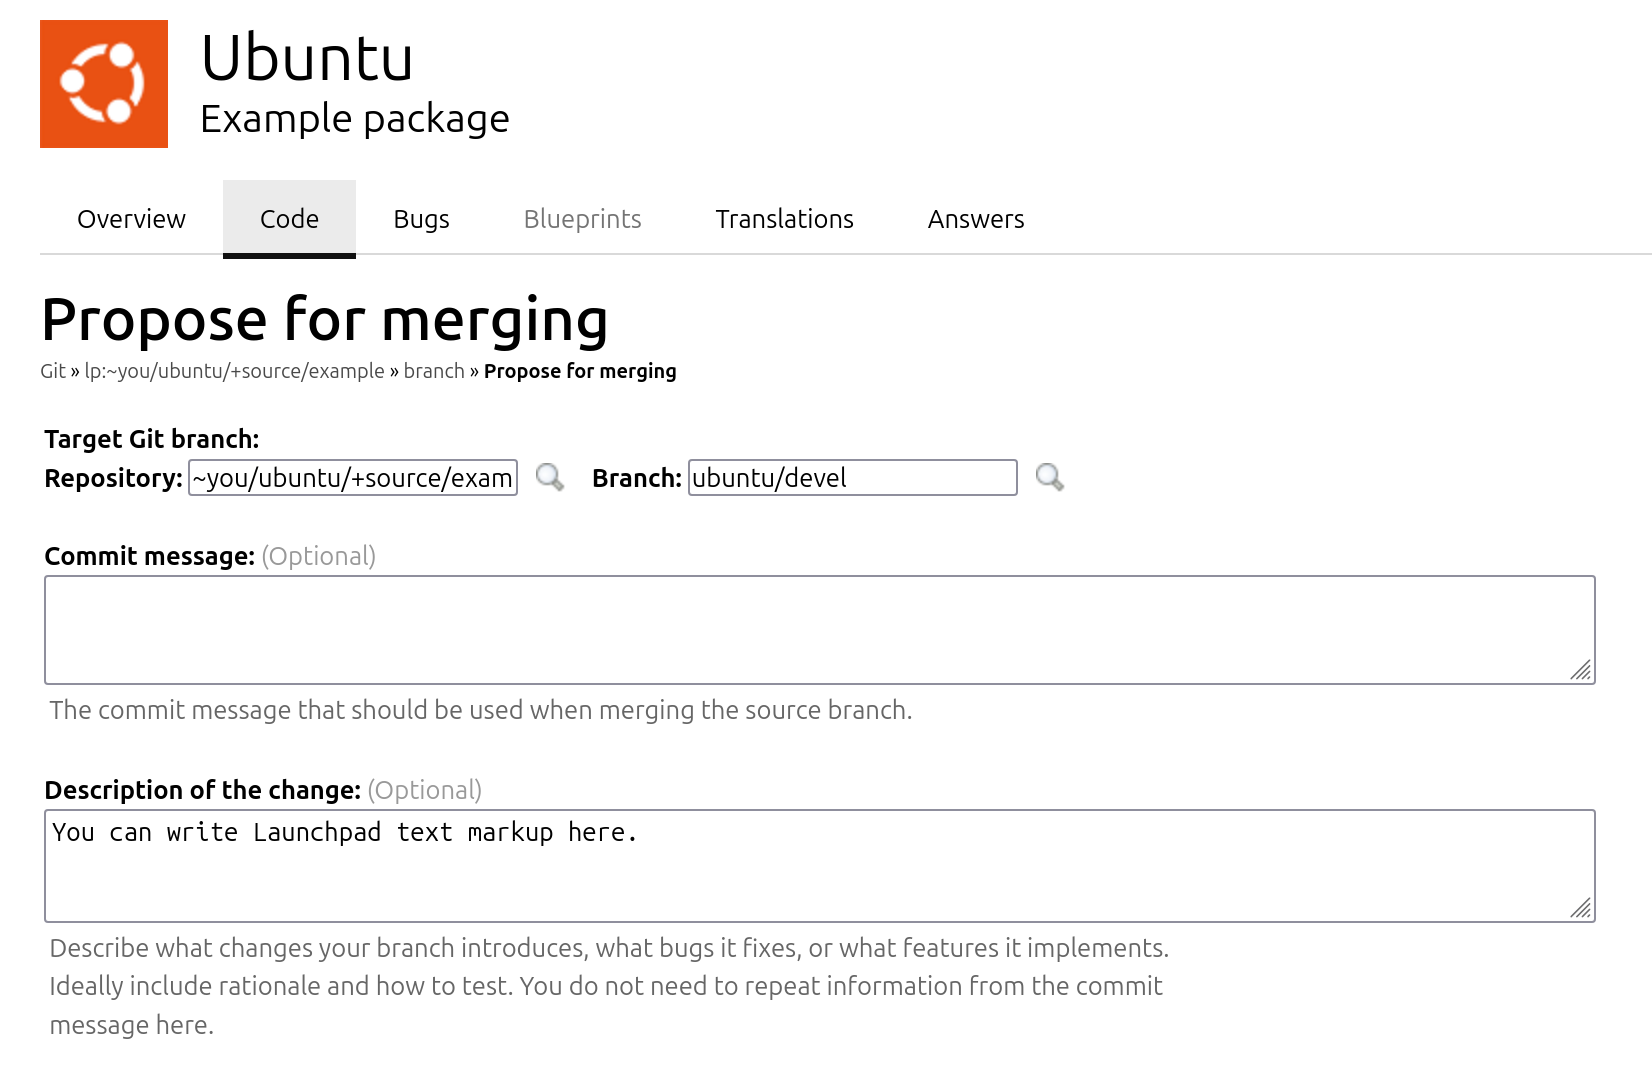 Screenshot of an example Launchpad "Propose for merging" page where "You can write Launchpad text markup here." is written in the textarea input field "Description of the change".